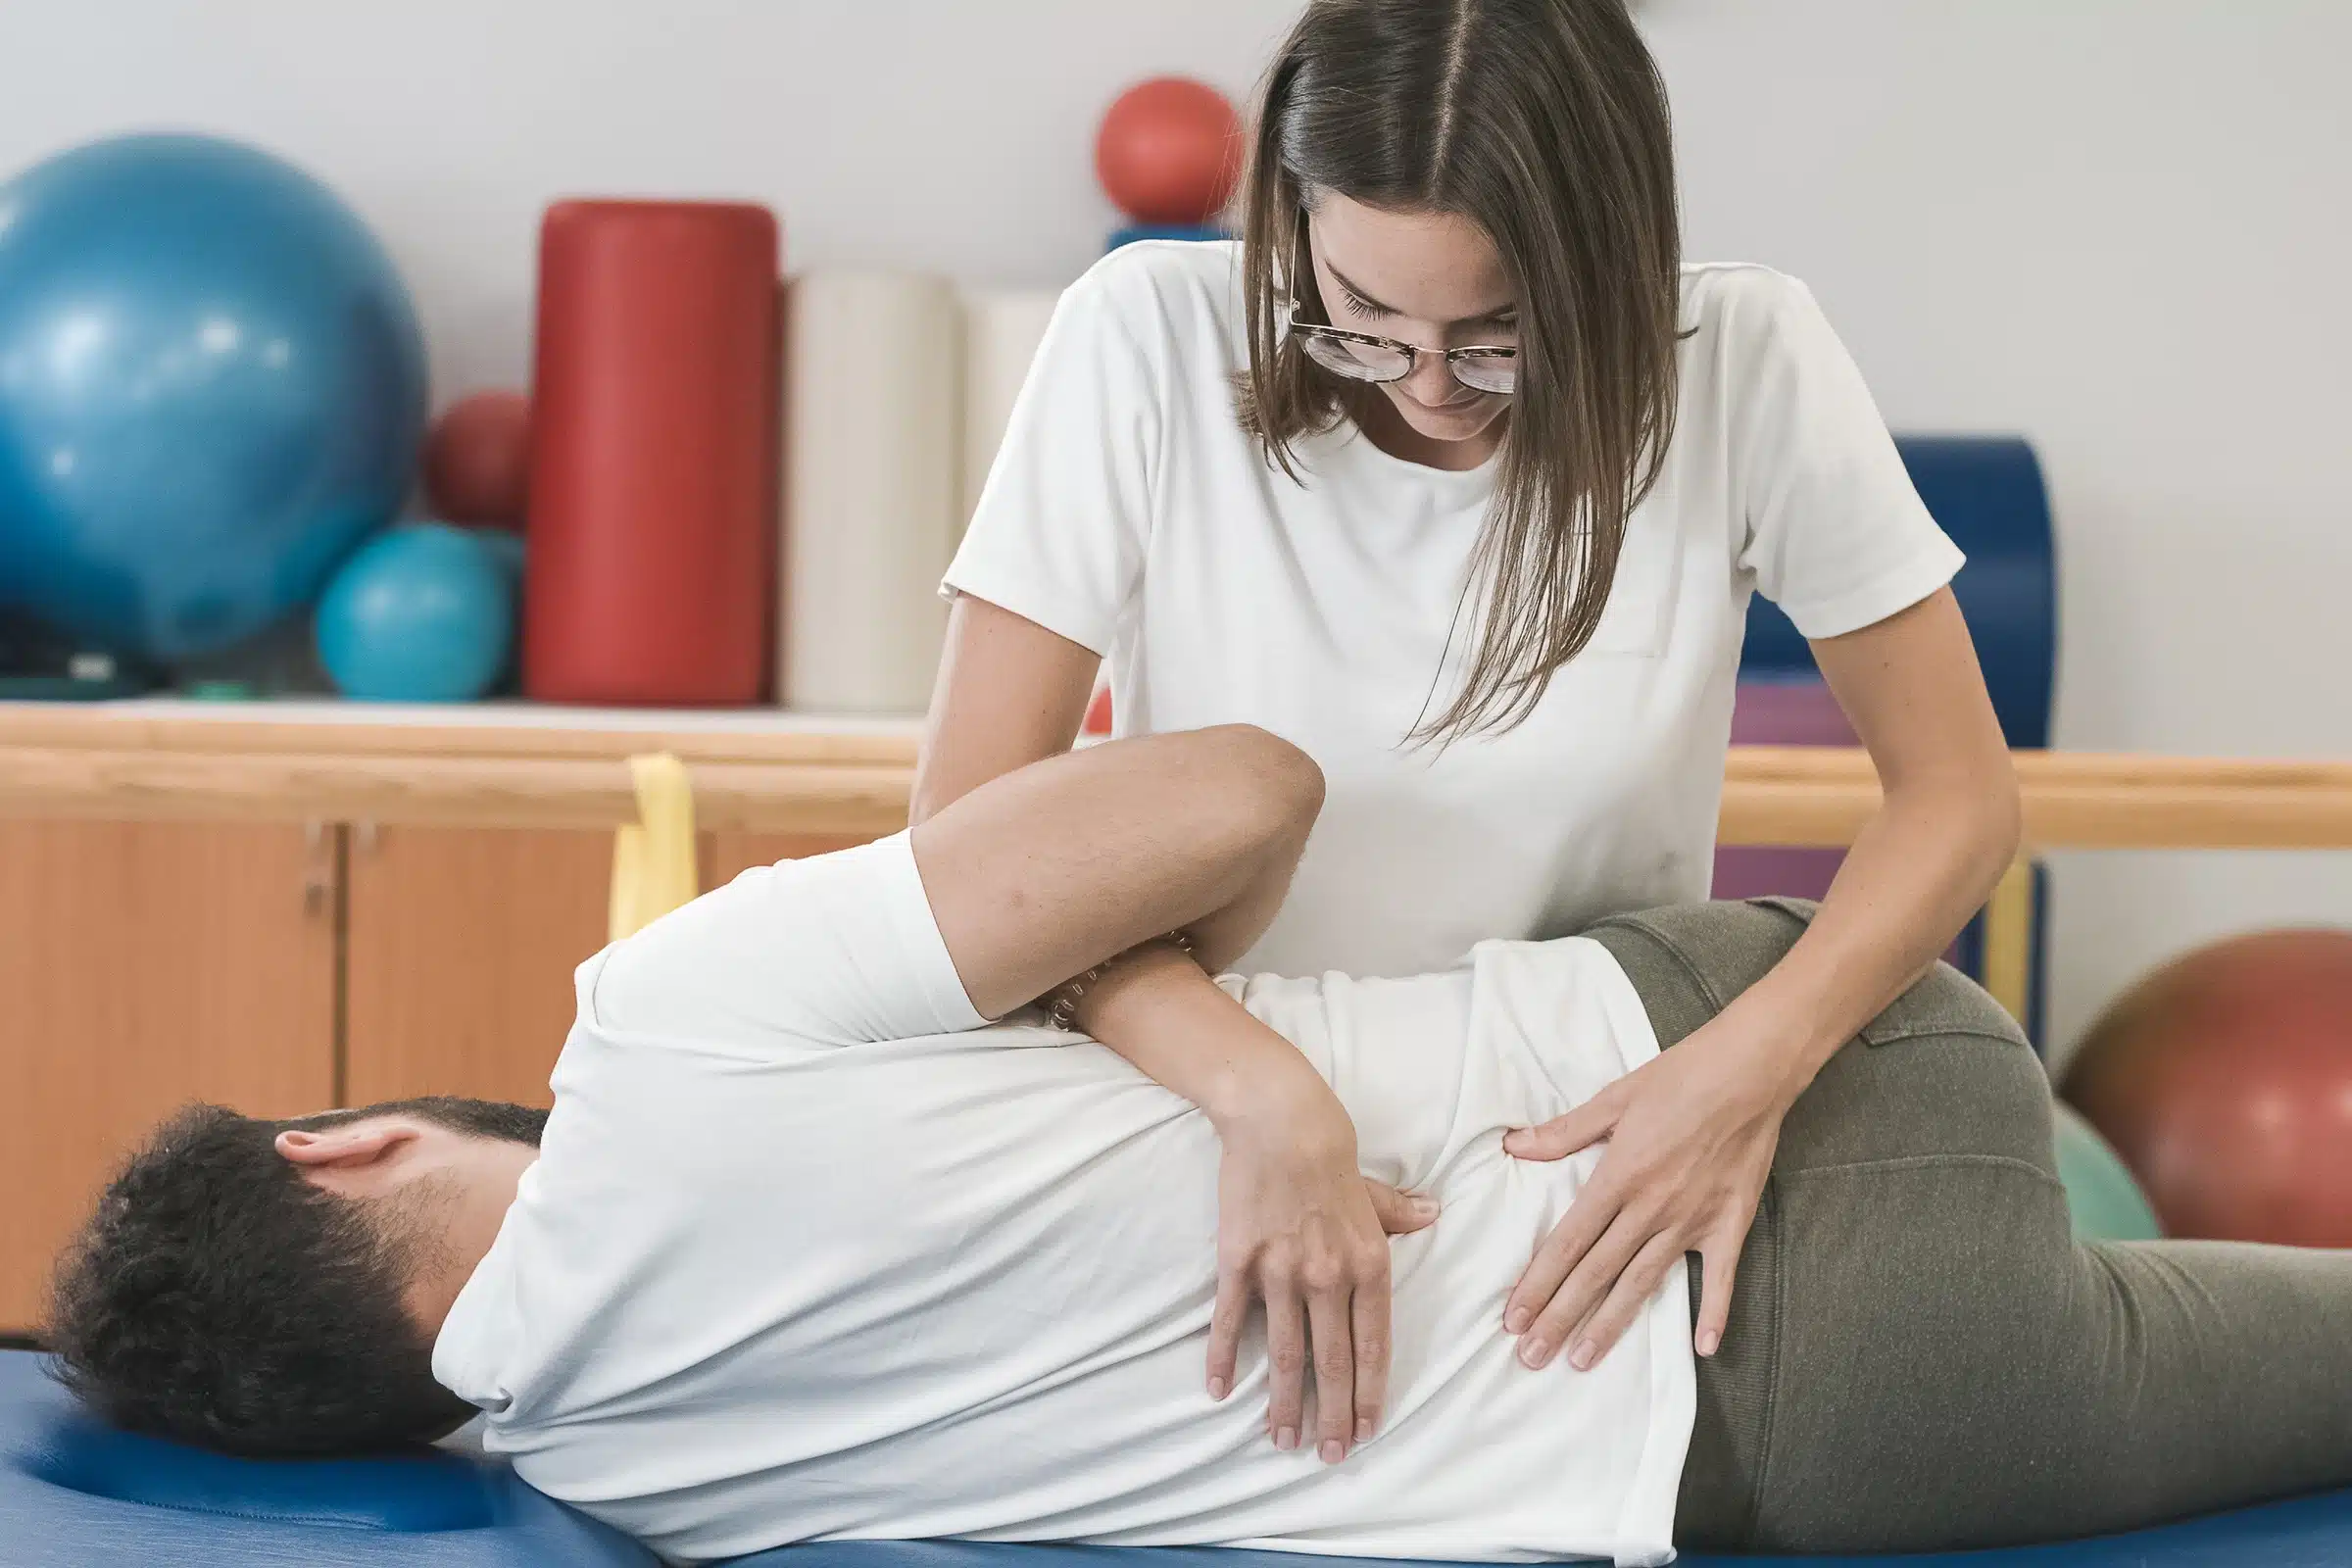 Chiropractic care offers a unique approach that focuses on restoring proper alignment in the spine